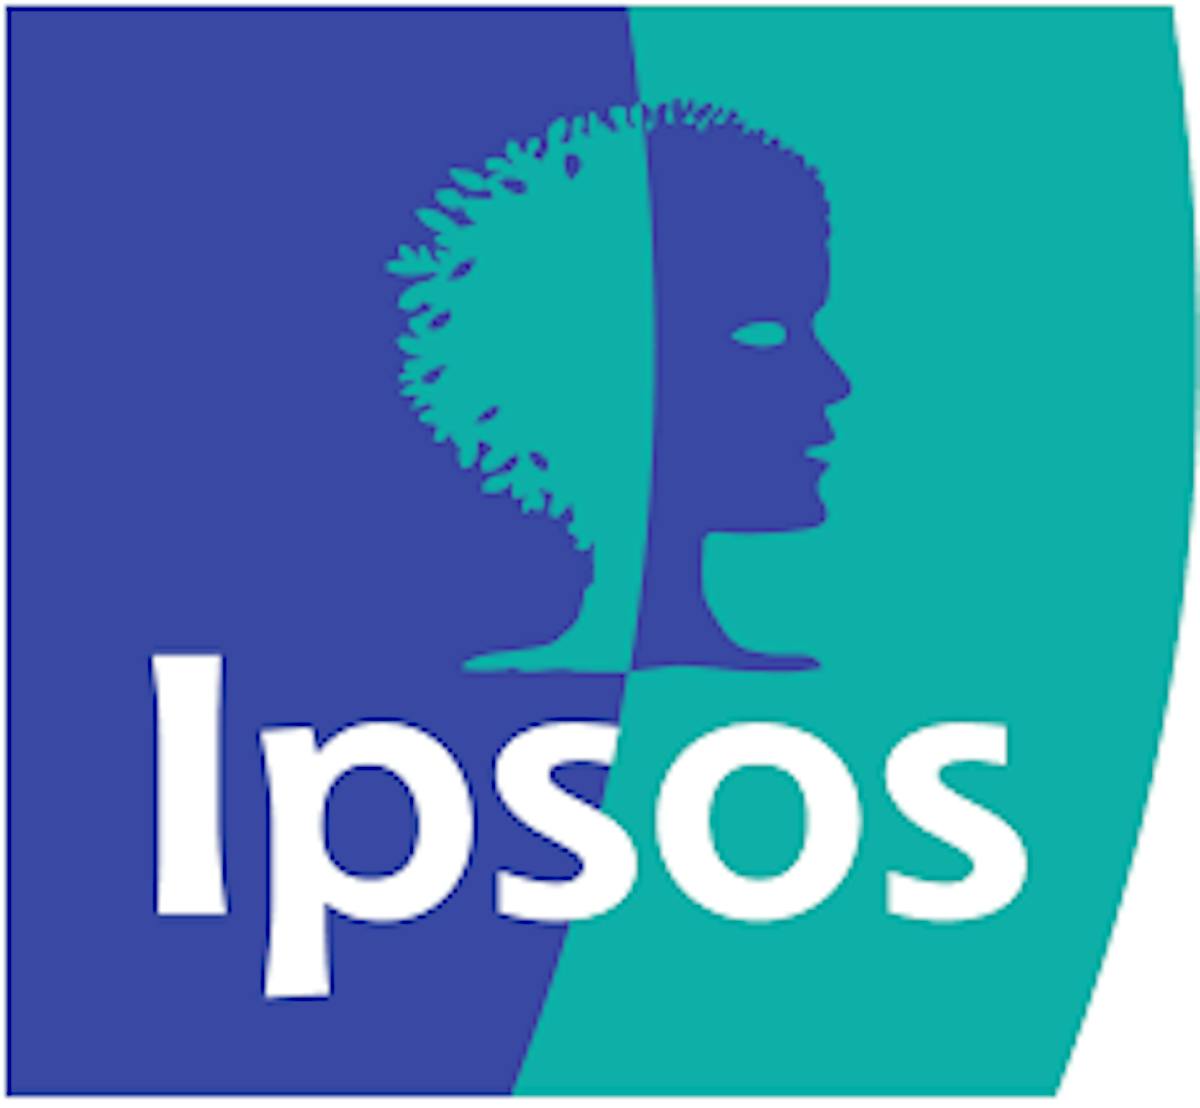 ipsos corporate logo used for branding special event at american brass corporate party gathering